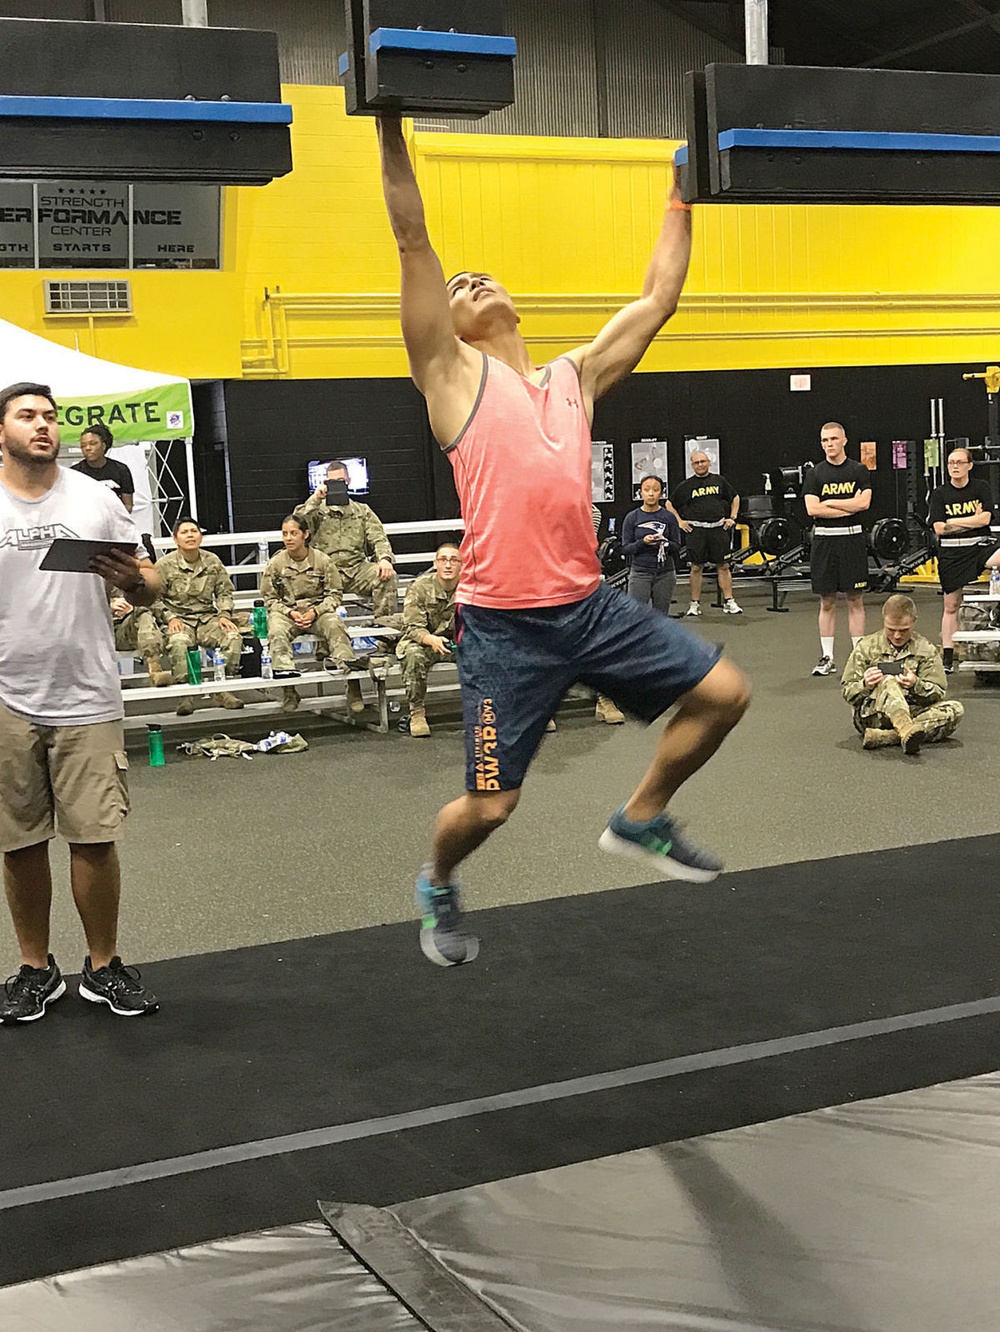 Lee troops prove their fitness prowess